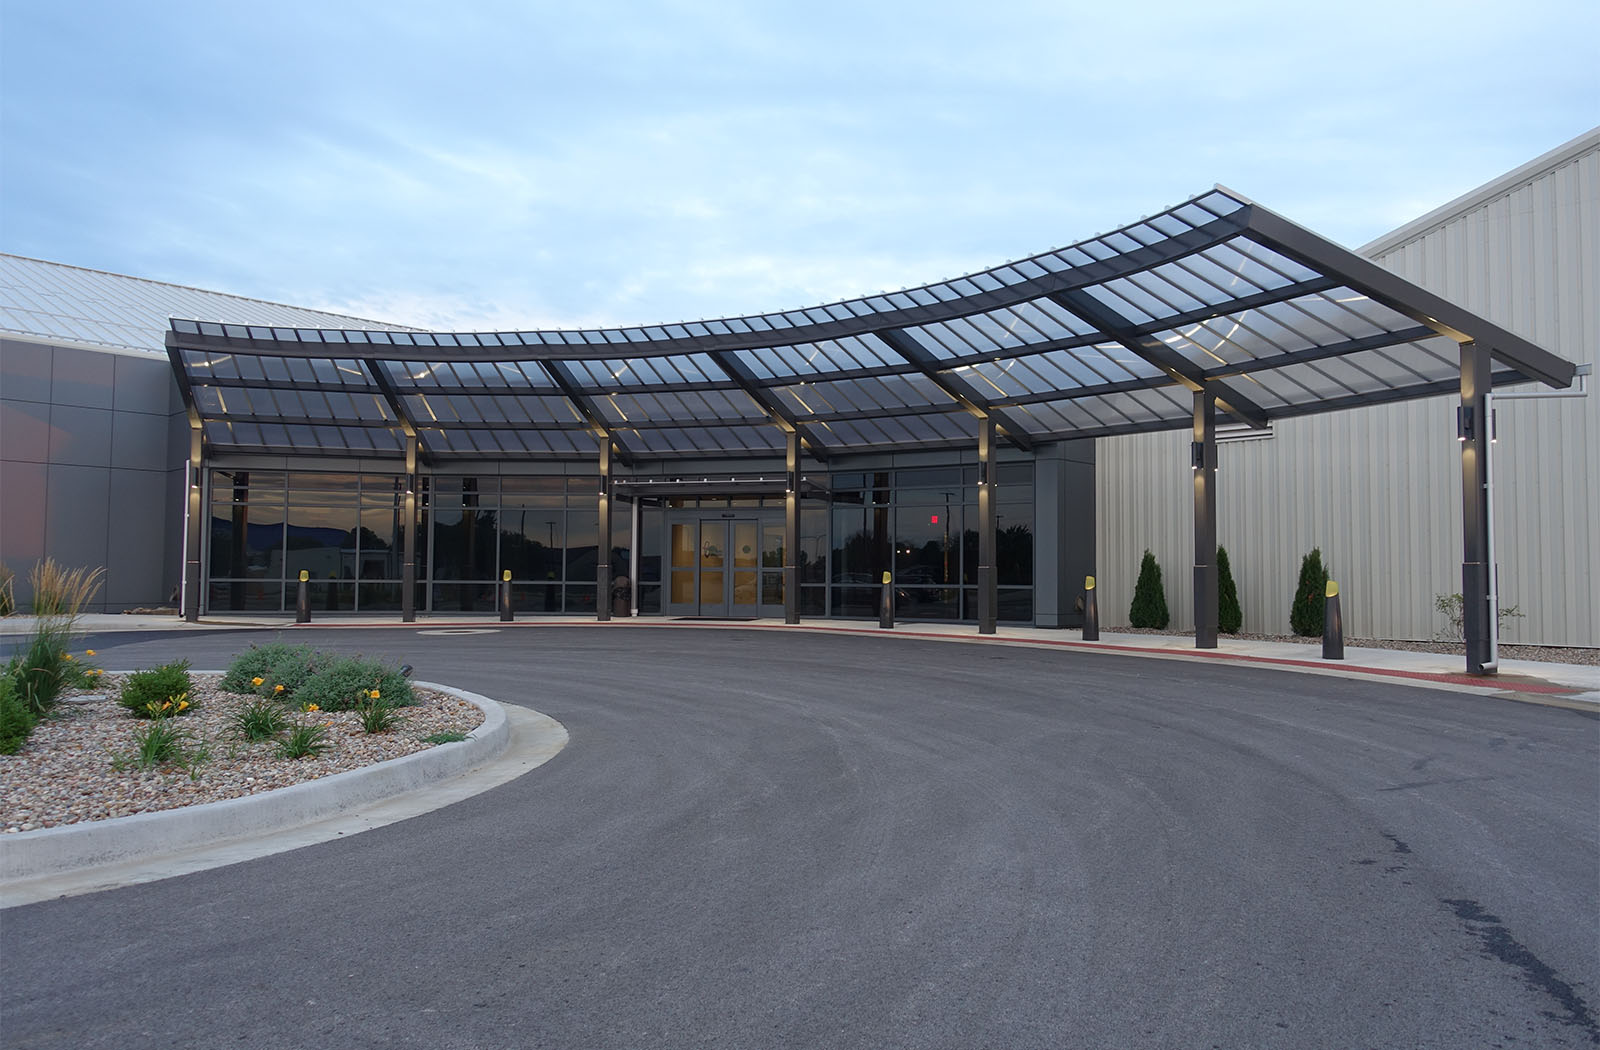 Steller Aviation-60168a-22x85-Entrance Canopy-Corporate Campus